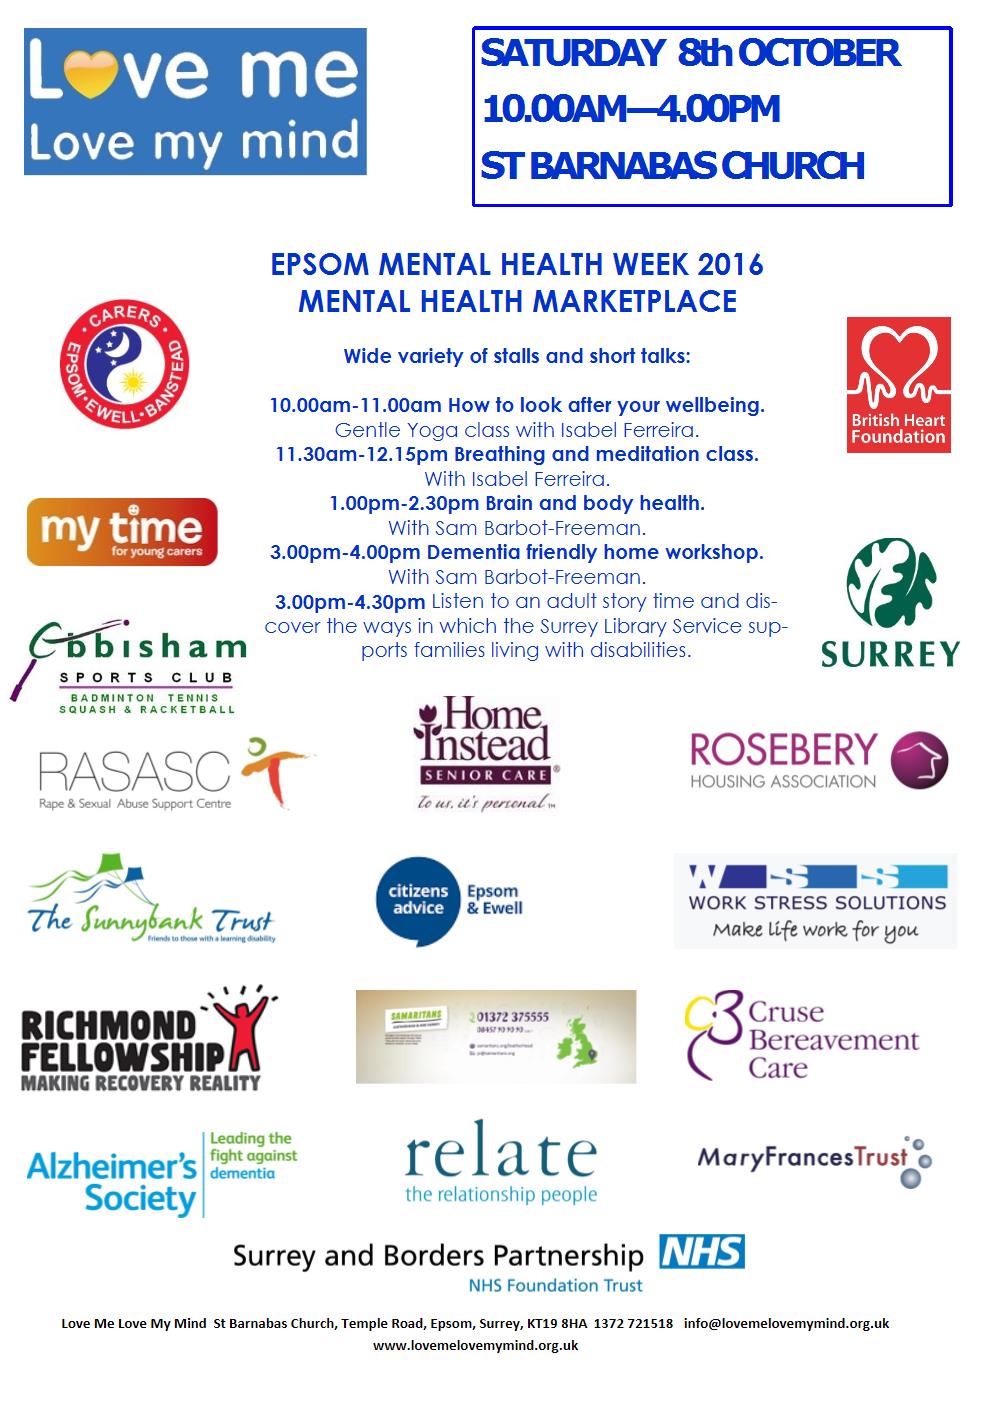 Mental Health Market Place 2016 poster